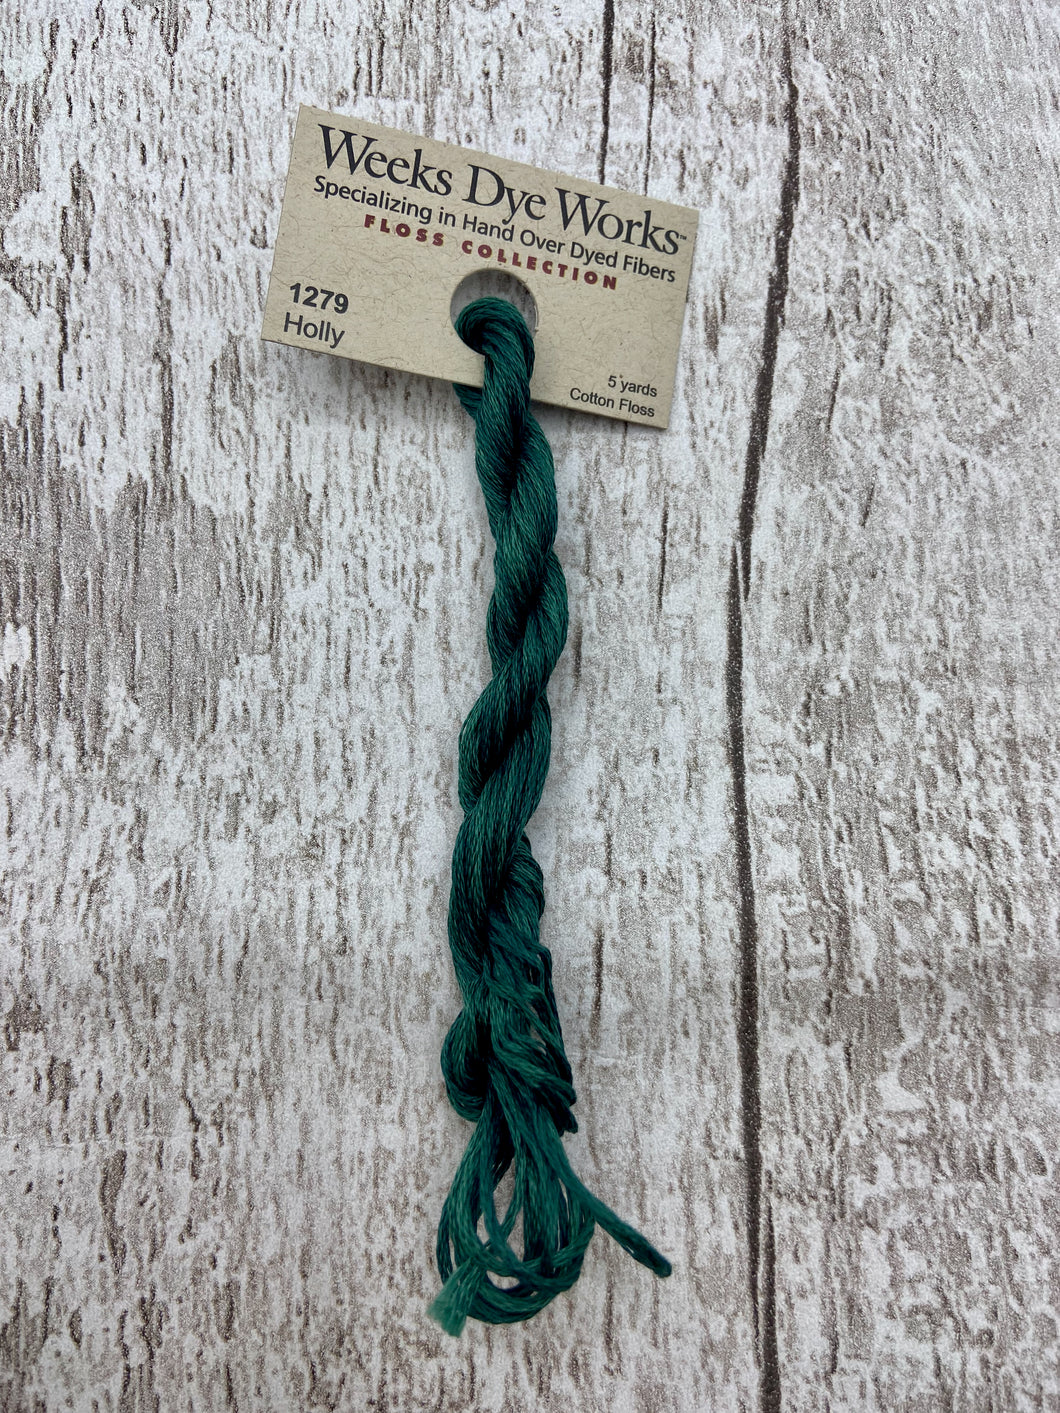 Holly (#1279) Weeks Dye Works, 6-strand cotton floss